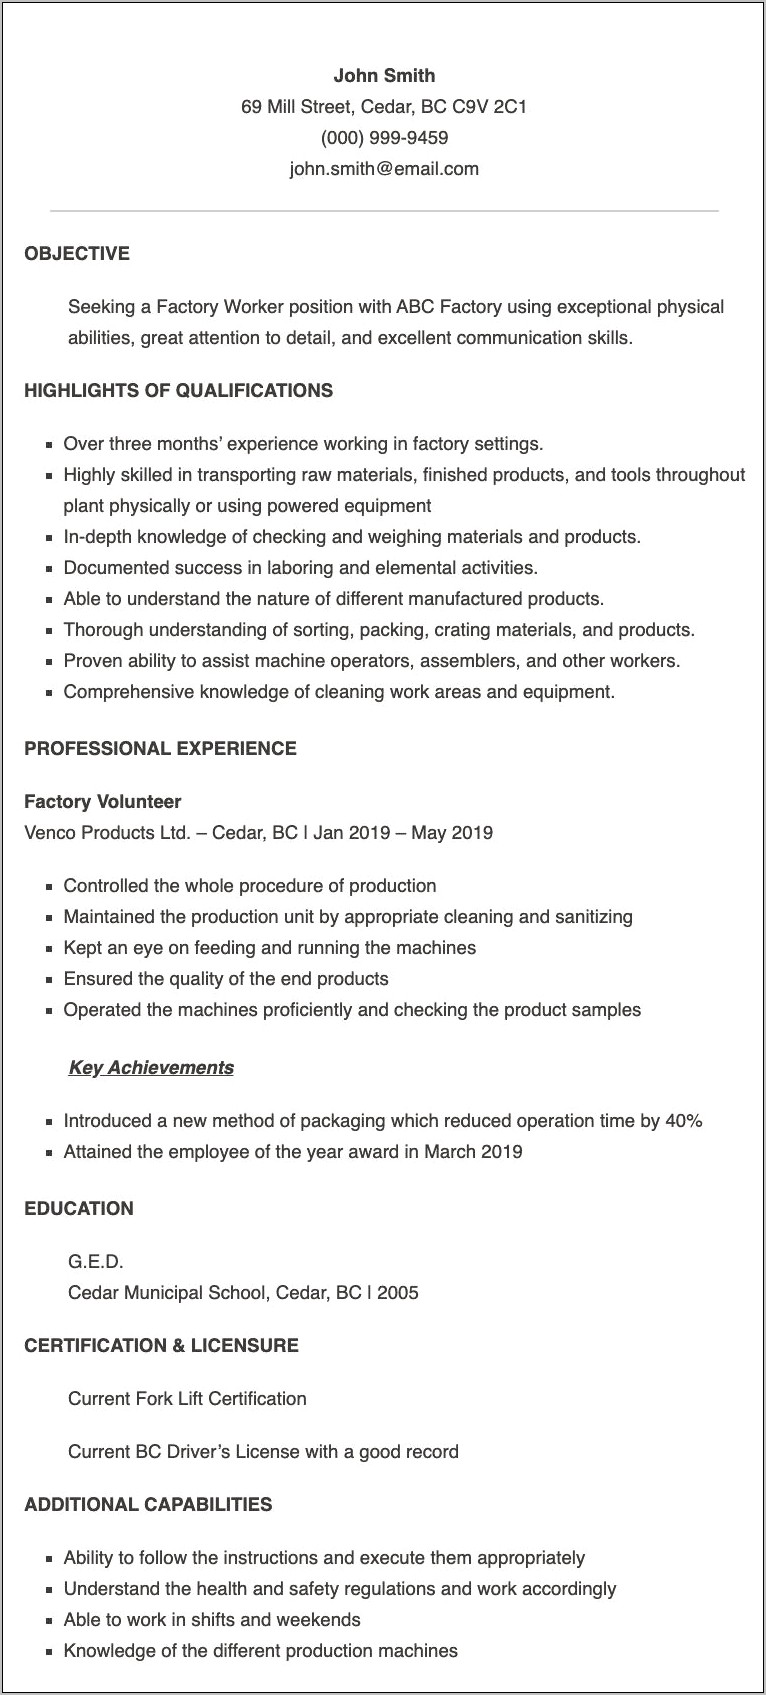 Resume Cover Letter For Factory Worker